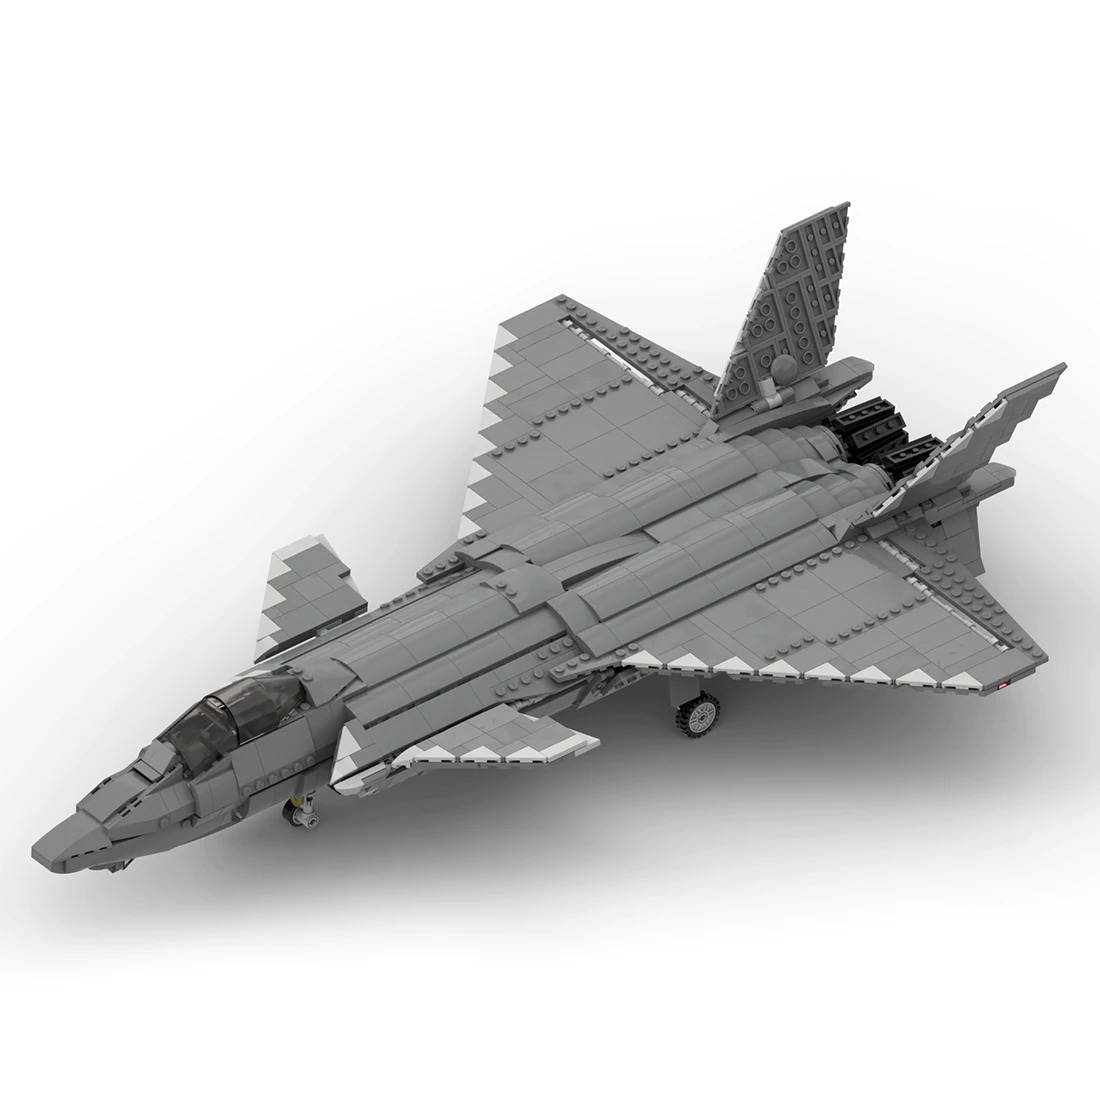 Authorized Moc 64706 J 20 Stealth Fighte Main 2.jpg